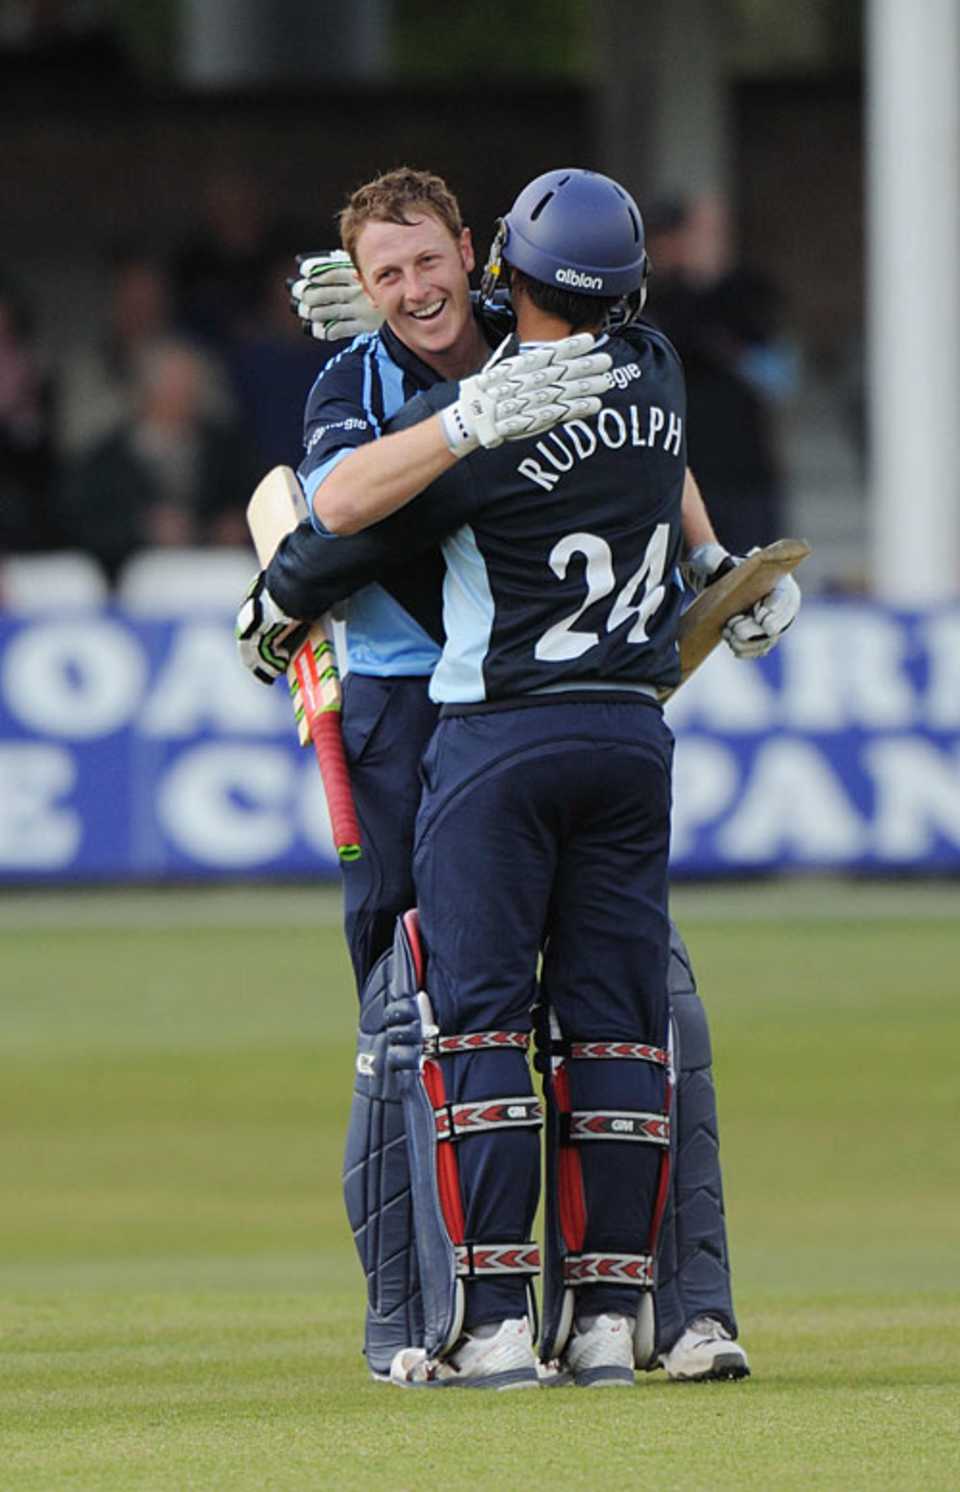 Andrew Gale and Jacques Rudolph shared an unbeaten opening stand of 233 to defeat Essex